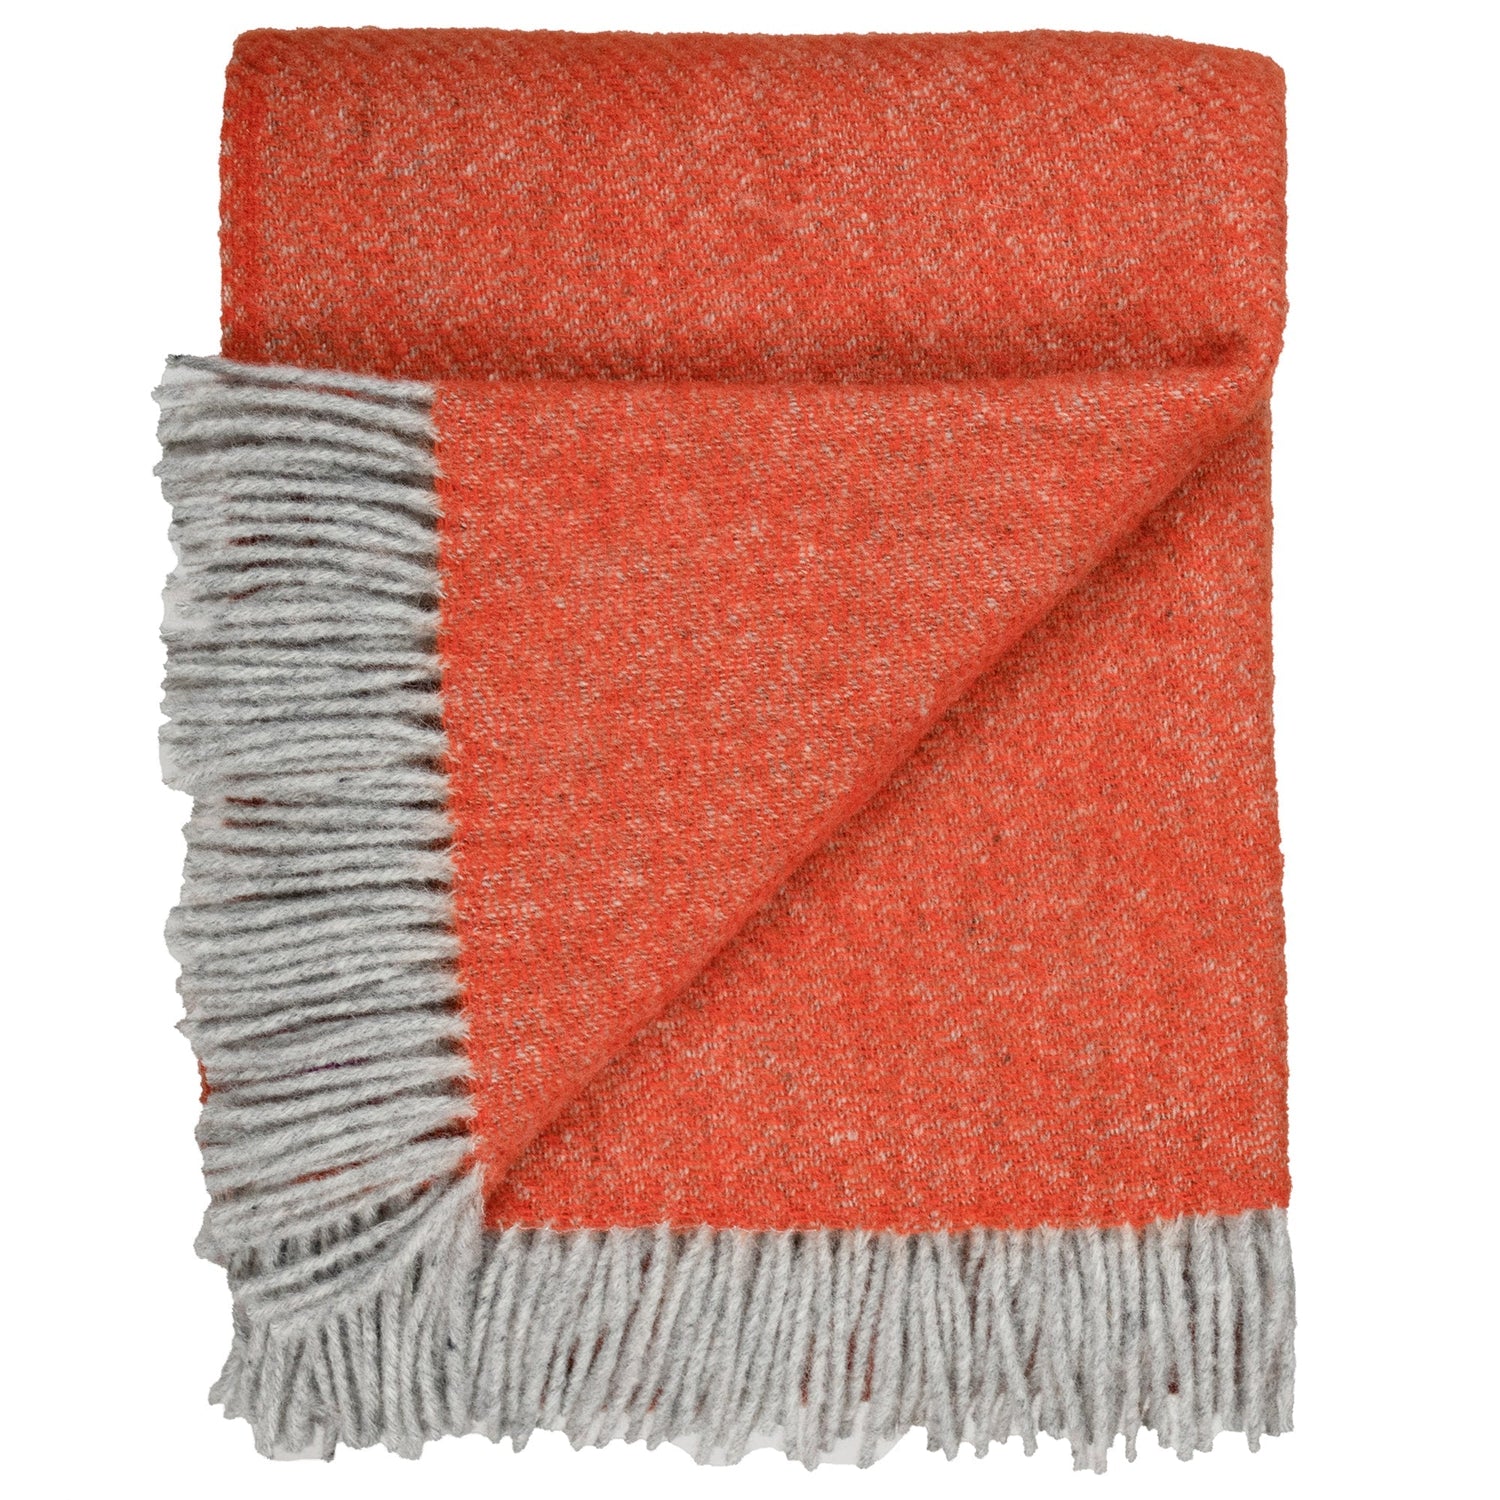 Southampton Home Wool Twill Throw Blanket (Poppy Orange)-Throws and Blankets-810032752439-SHWoolTwillOrange-Prince of Scots